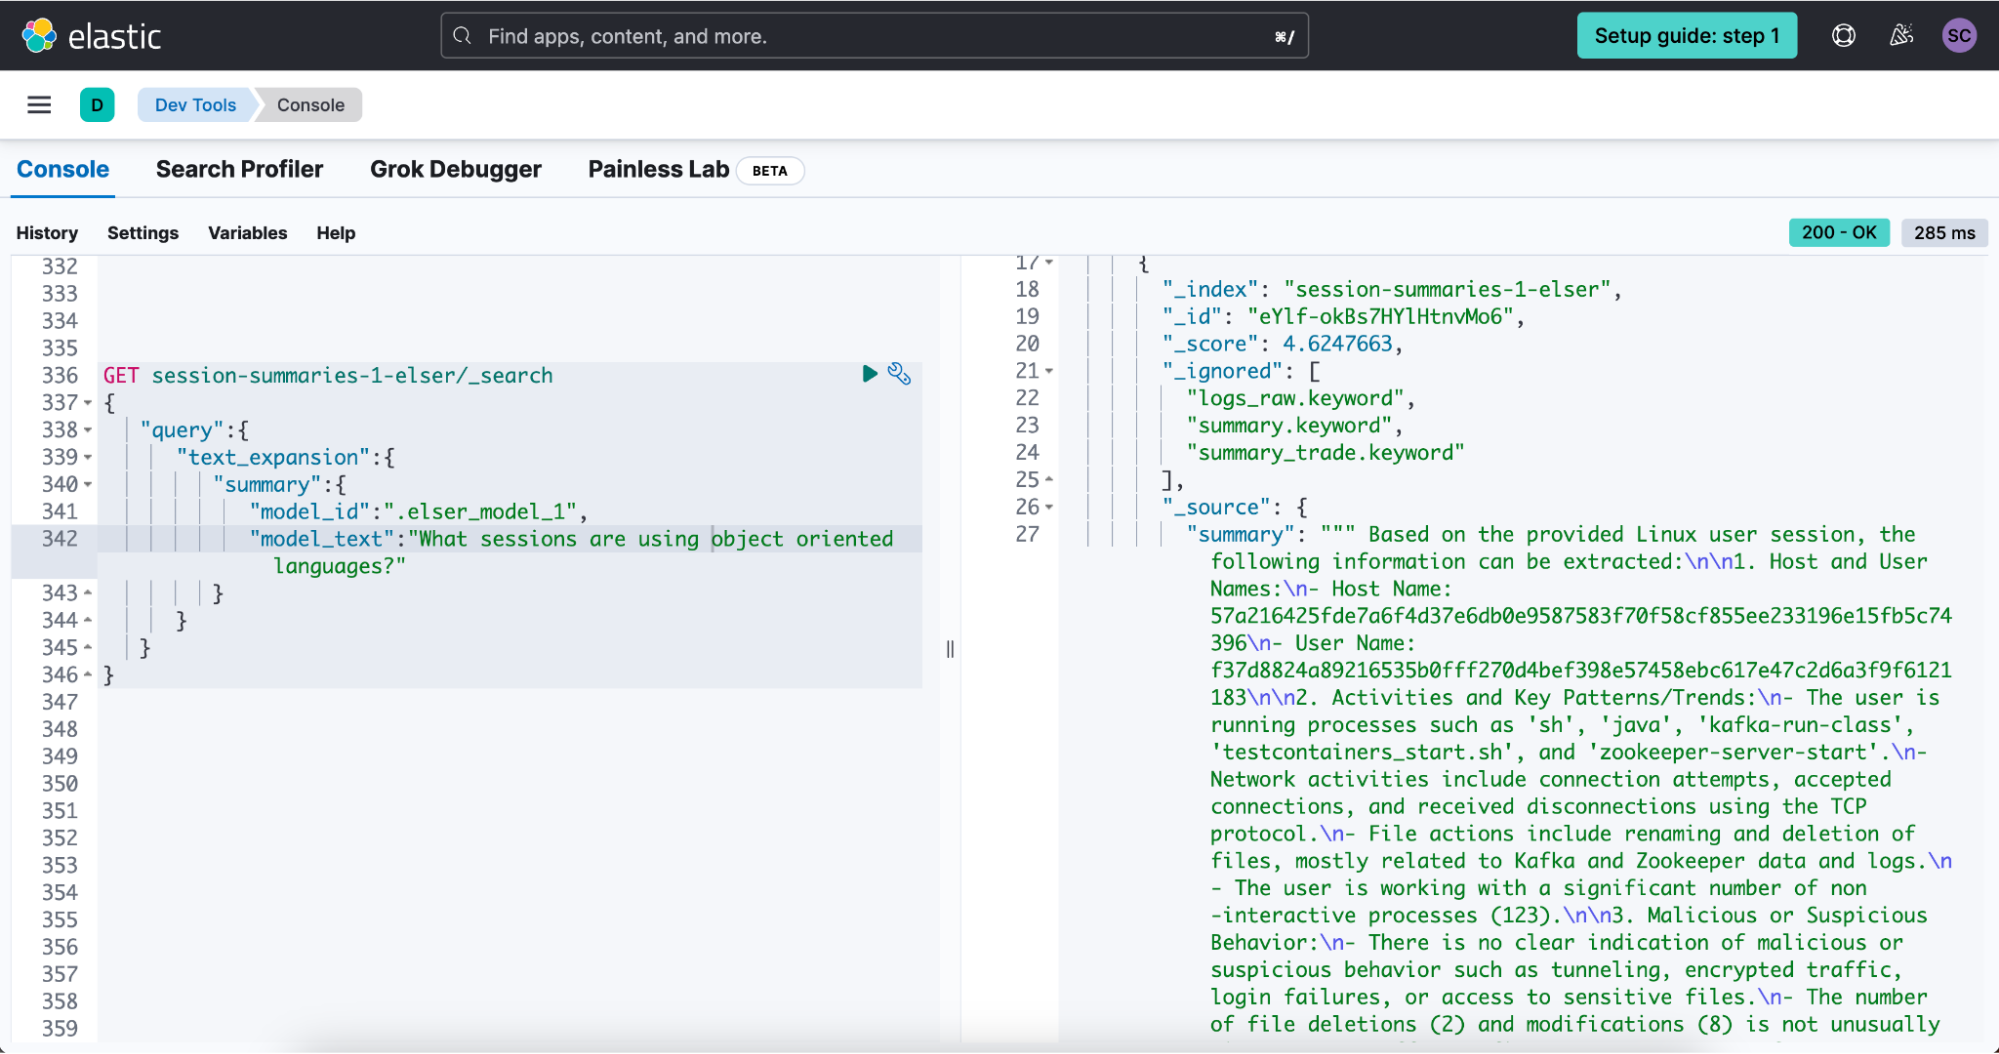 Example screenshot of using semantic search with the Elastic dev tools console